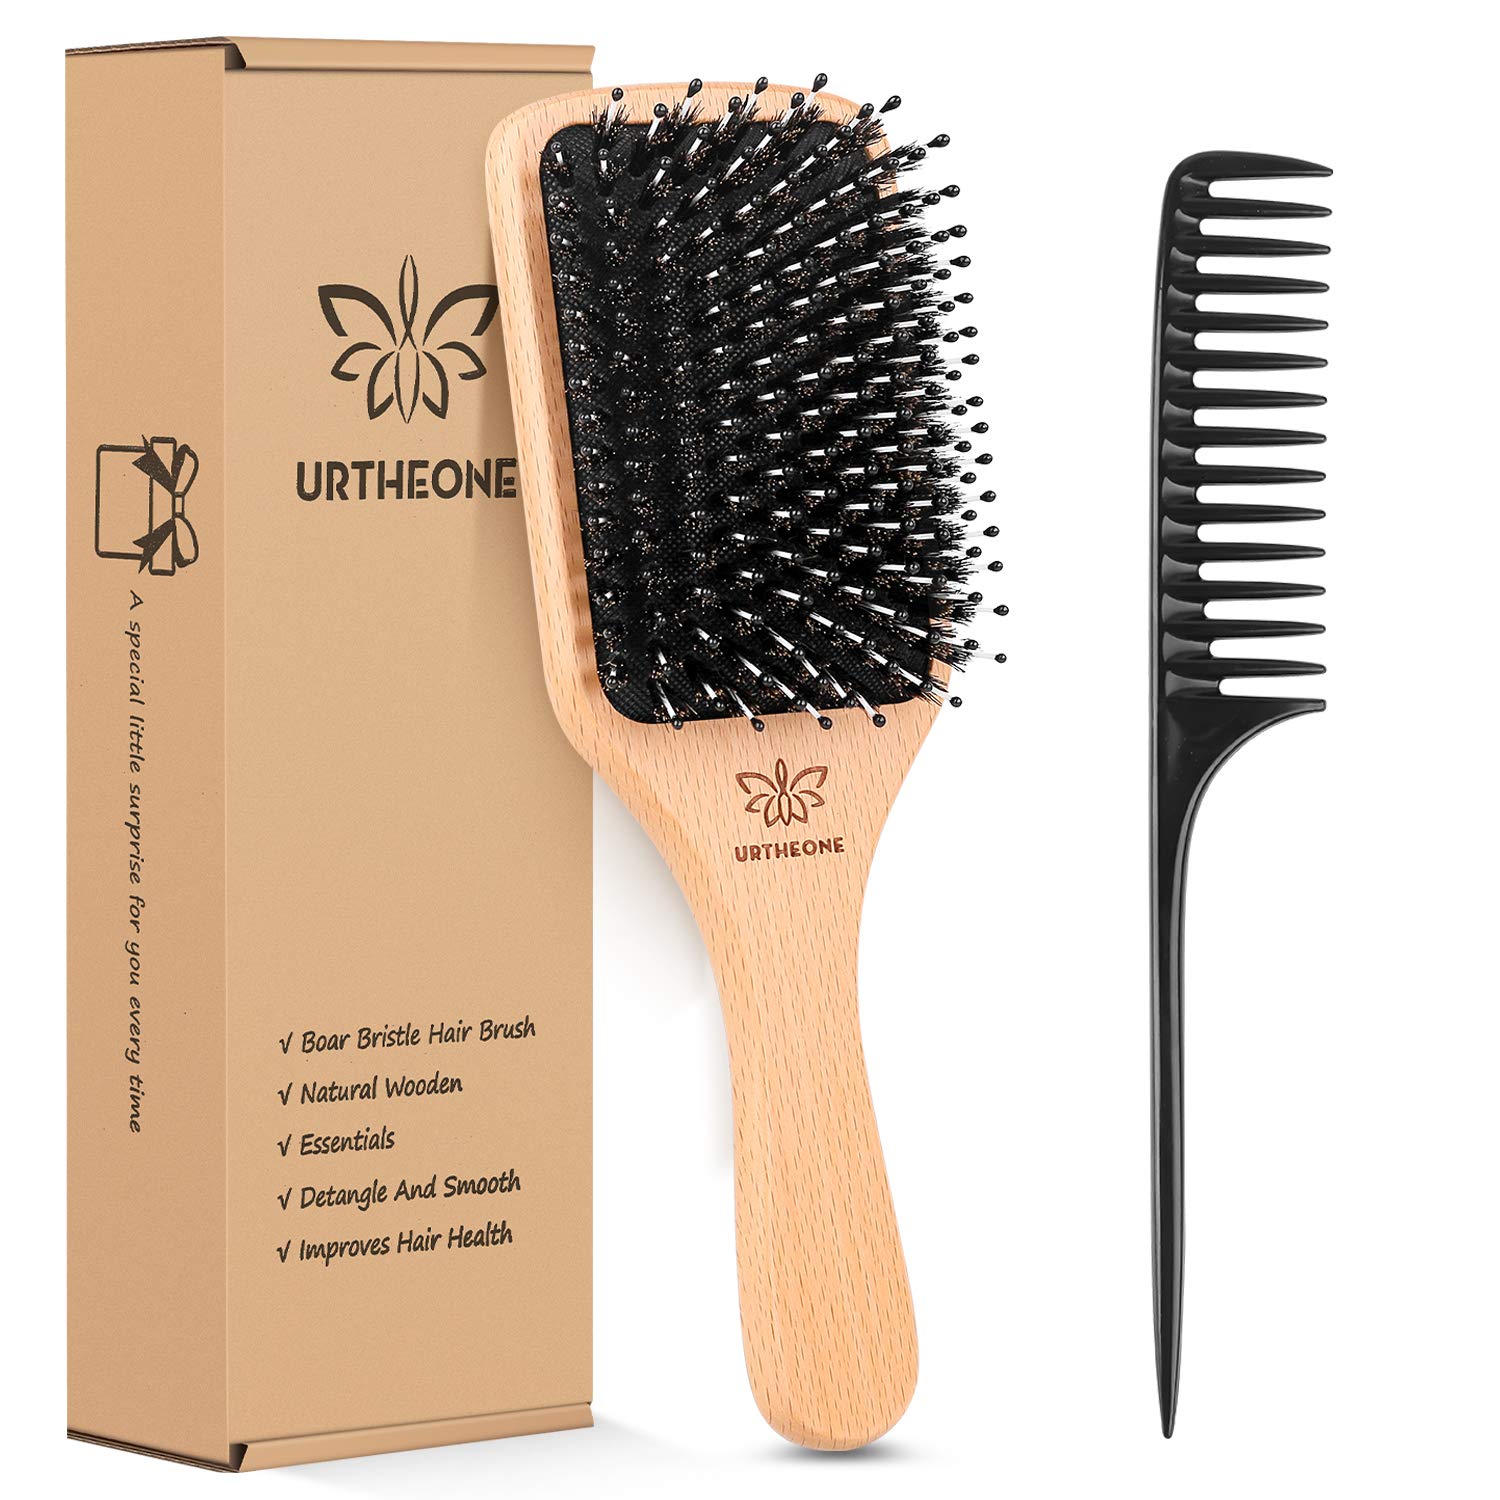 Selling Out Fast! Hair Brush Boar Bristle Hairbrush for Thick Curly Thin Long Short Wet or Dry Hair - Limited-Time Discount!